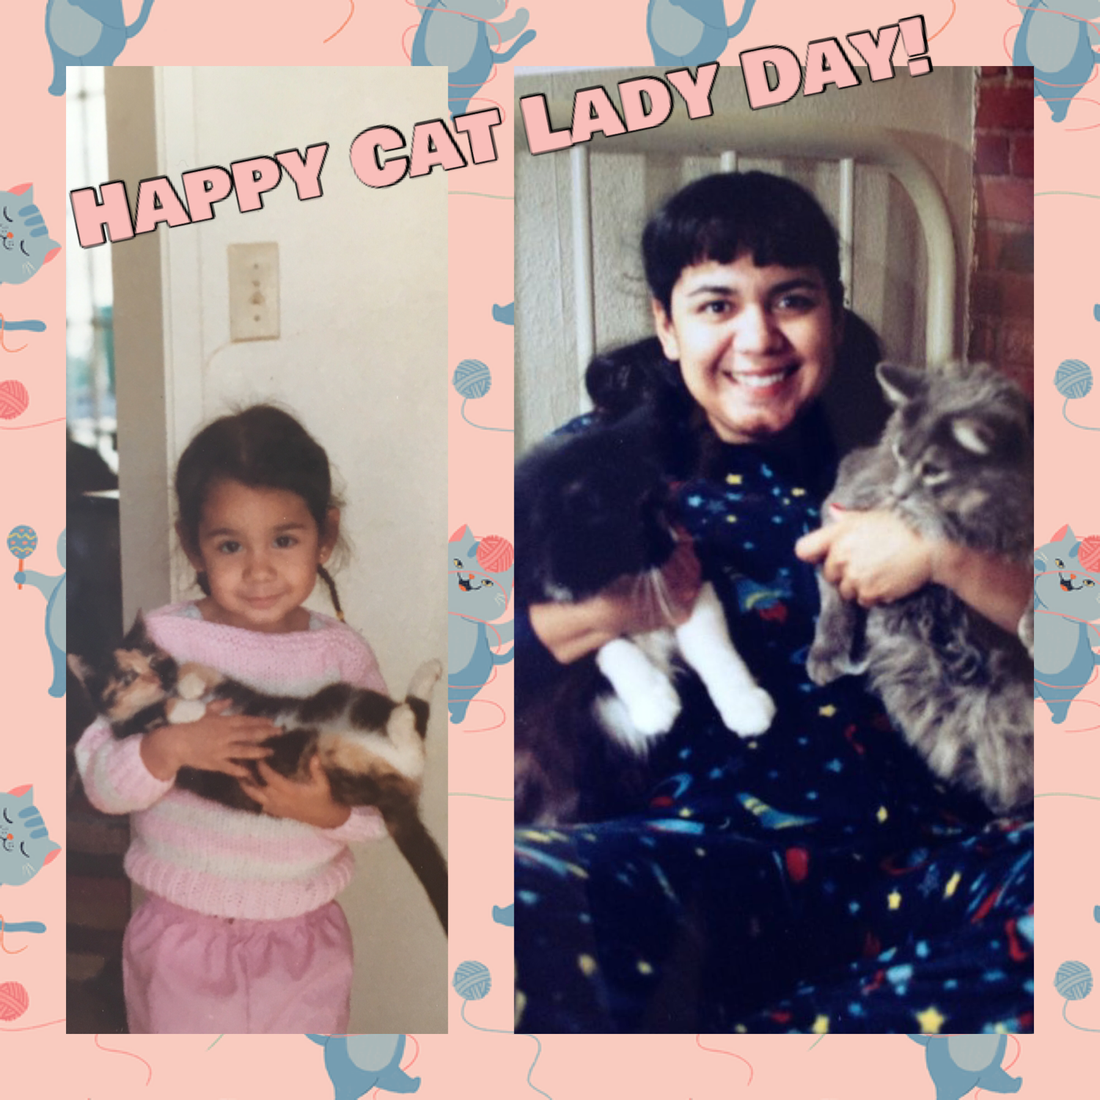 The Day of the Cat Lady!